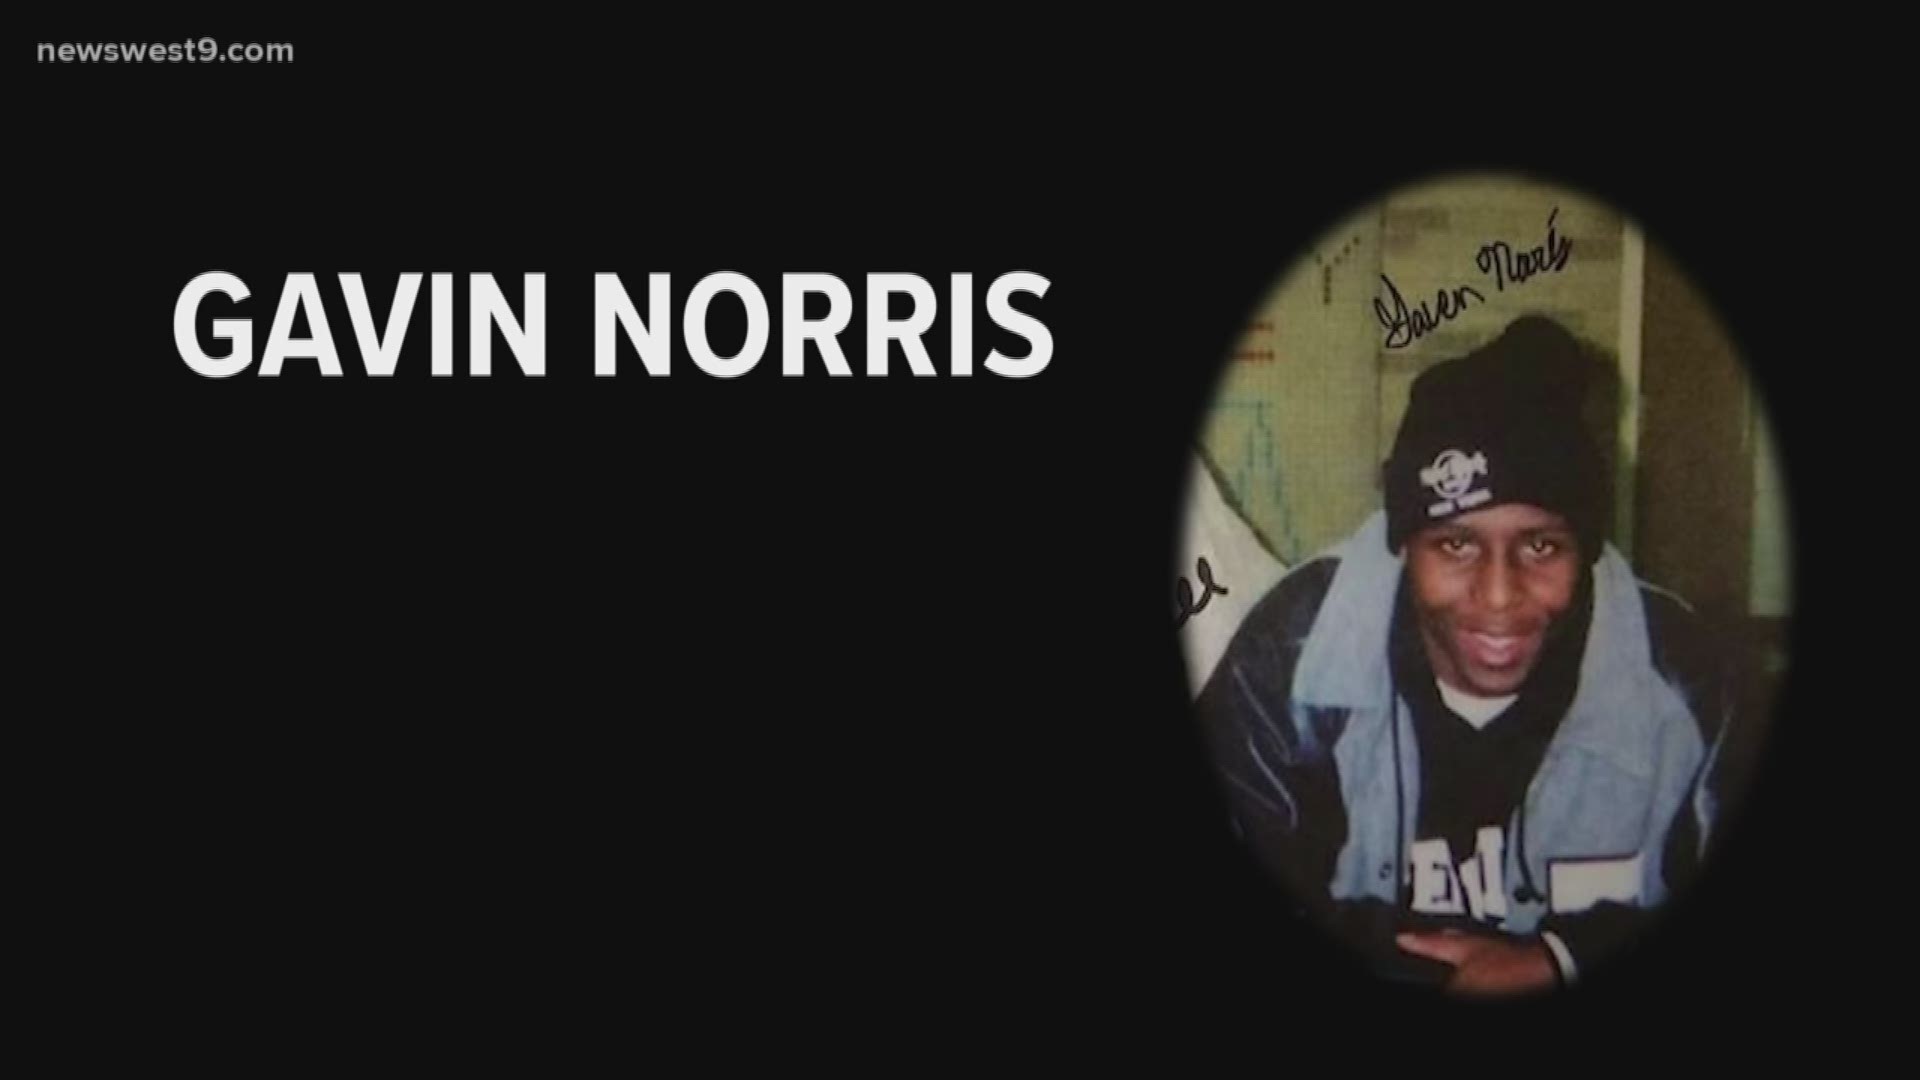 Gaven Norris is a family attorney that has deep-seeded roots in the local civil rights movements.